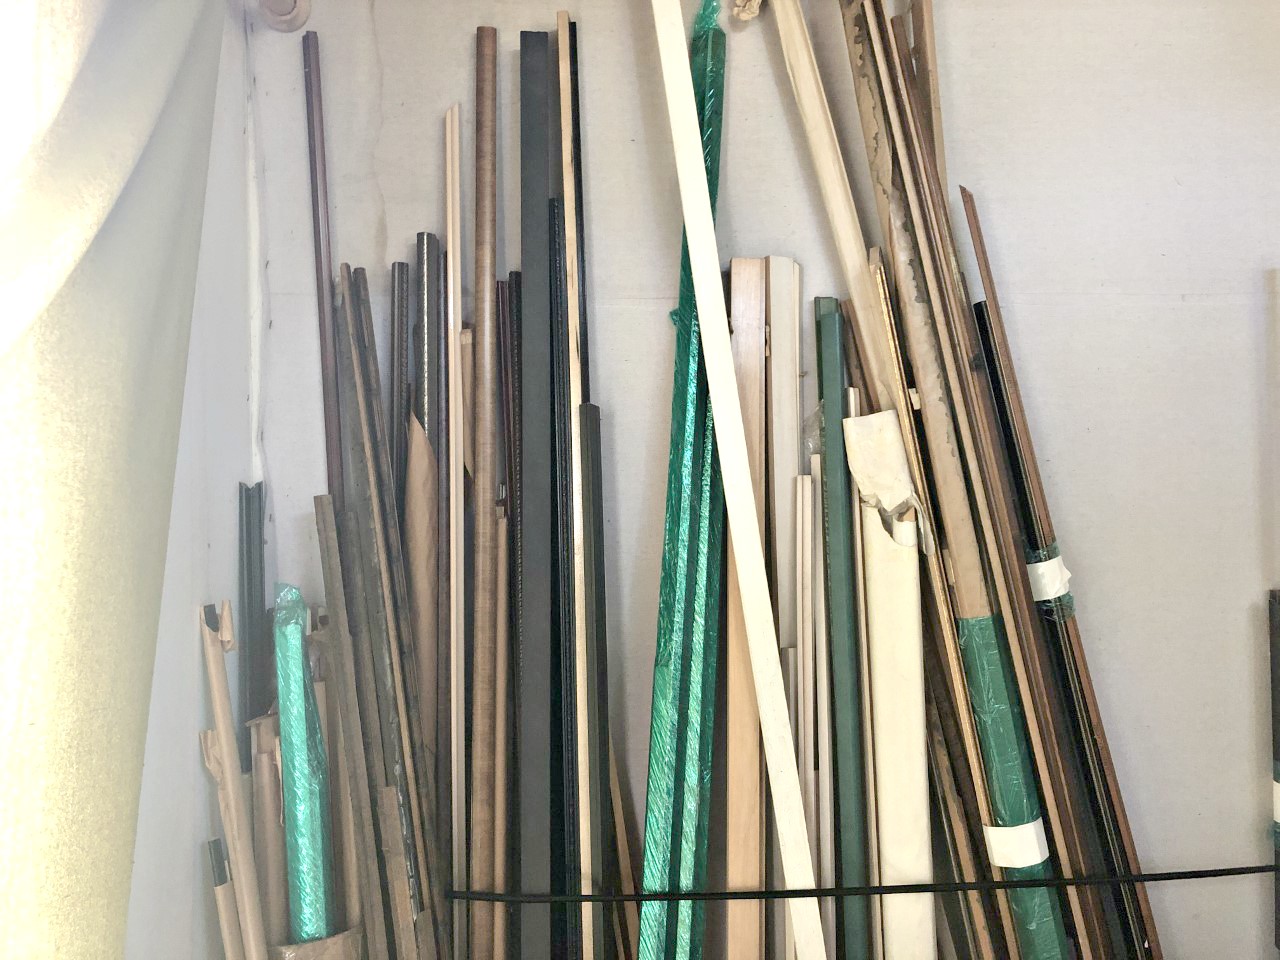 Picture Framing Equipment Lot: Morso Chopper, C&H Oval Mat & Glass Cutter / Circle Cutter, Assorted Hardware, Assorted Matboard, Assorted Wood Moulding, Miter Saw Hand Cutter, & Ingento Paper Cutter (Used) Item # AGFS-79 (New York)